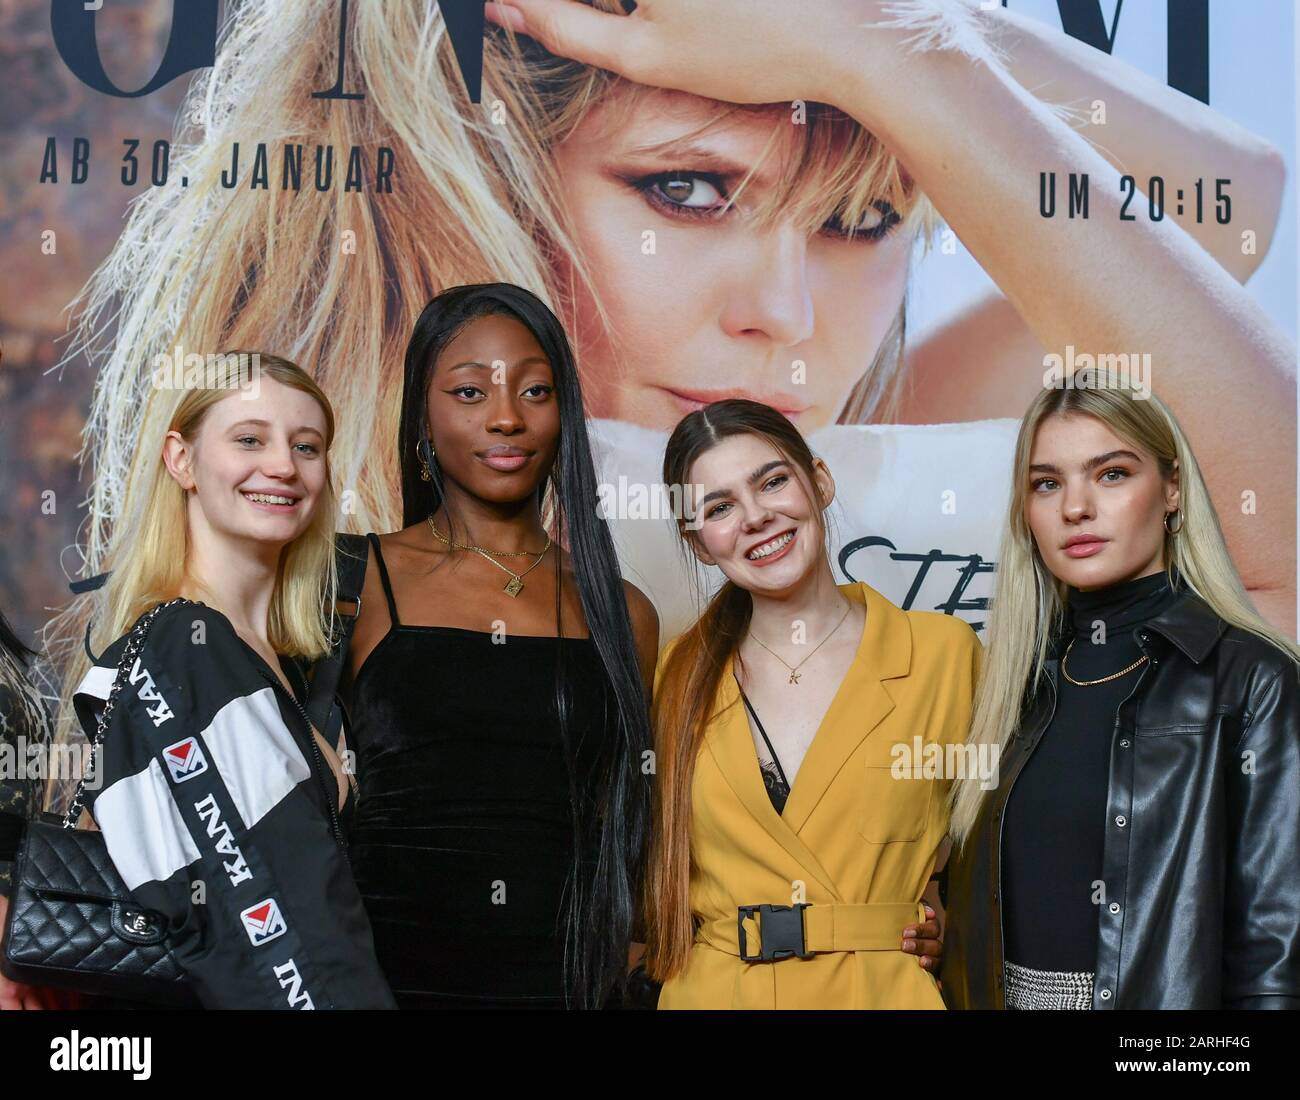 Berlin, Germany. 27th Jan, 2020. The models Trixi Giese (l-r), Toni Dreher-Adenuga, Klaudia with K and Sarah Almoril at the exclusive cinema preview of the 15th season of 'Germany's next Topmodel - by Heidi Klum' by ProSieben in the cinema Zoo Palast. Credit: Jens Kalaene/dpa-Zentralbild/ZB/dpa/Alamy Live News Stock Photo